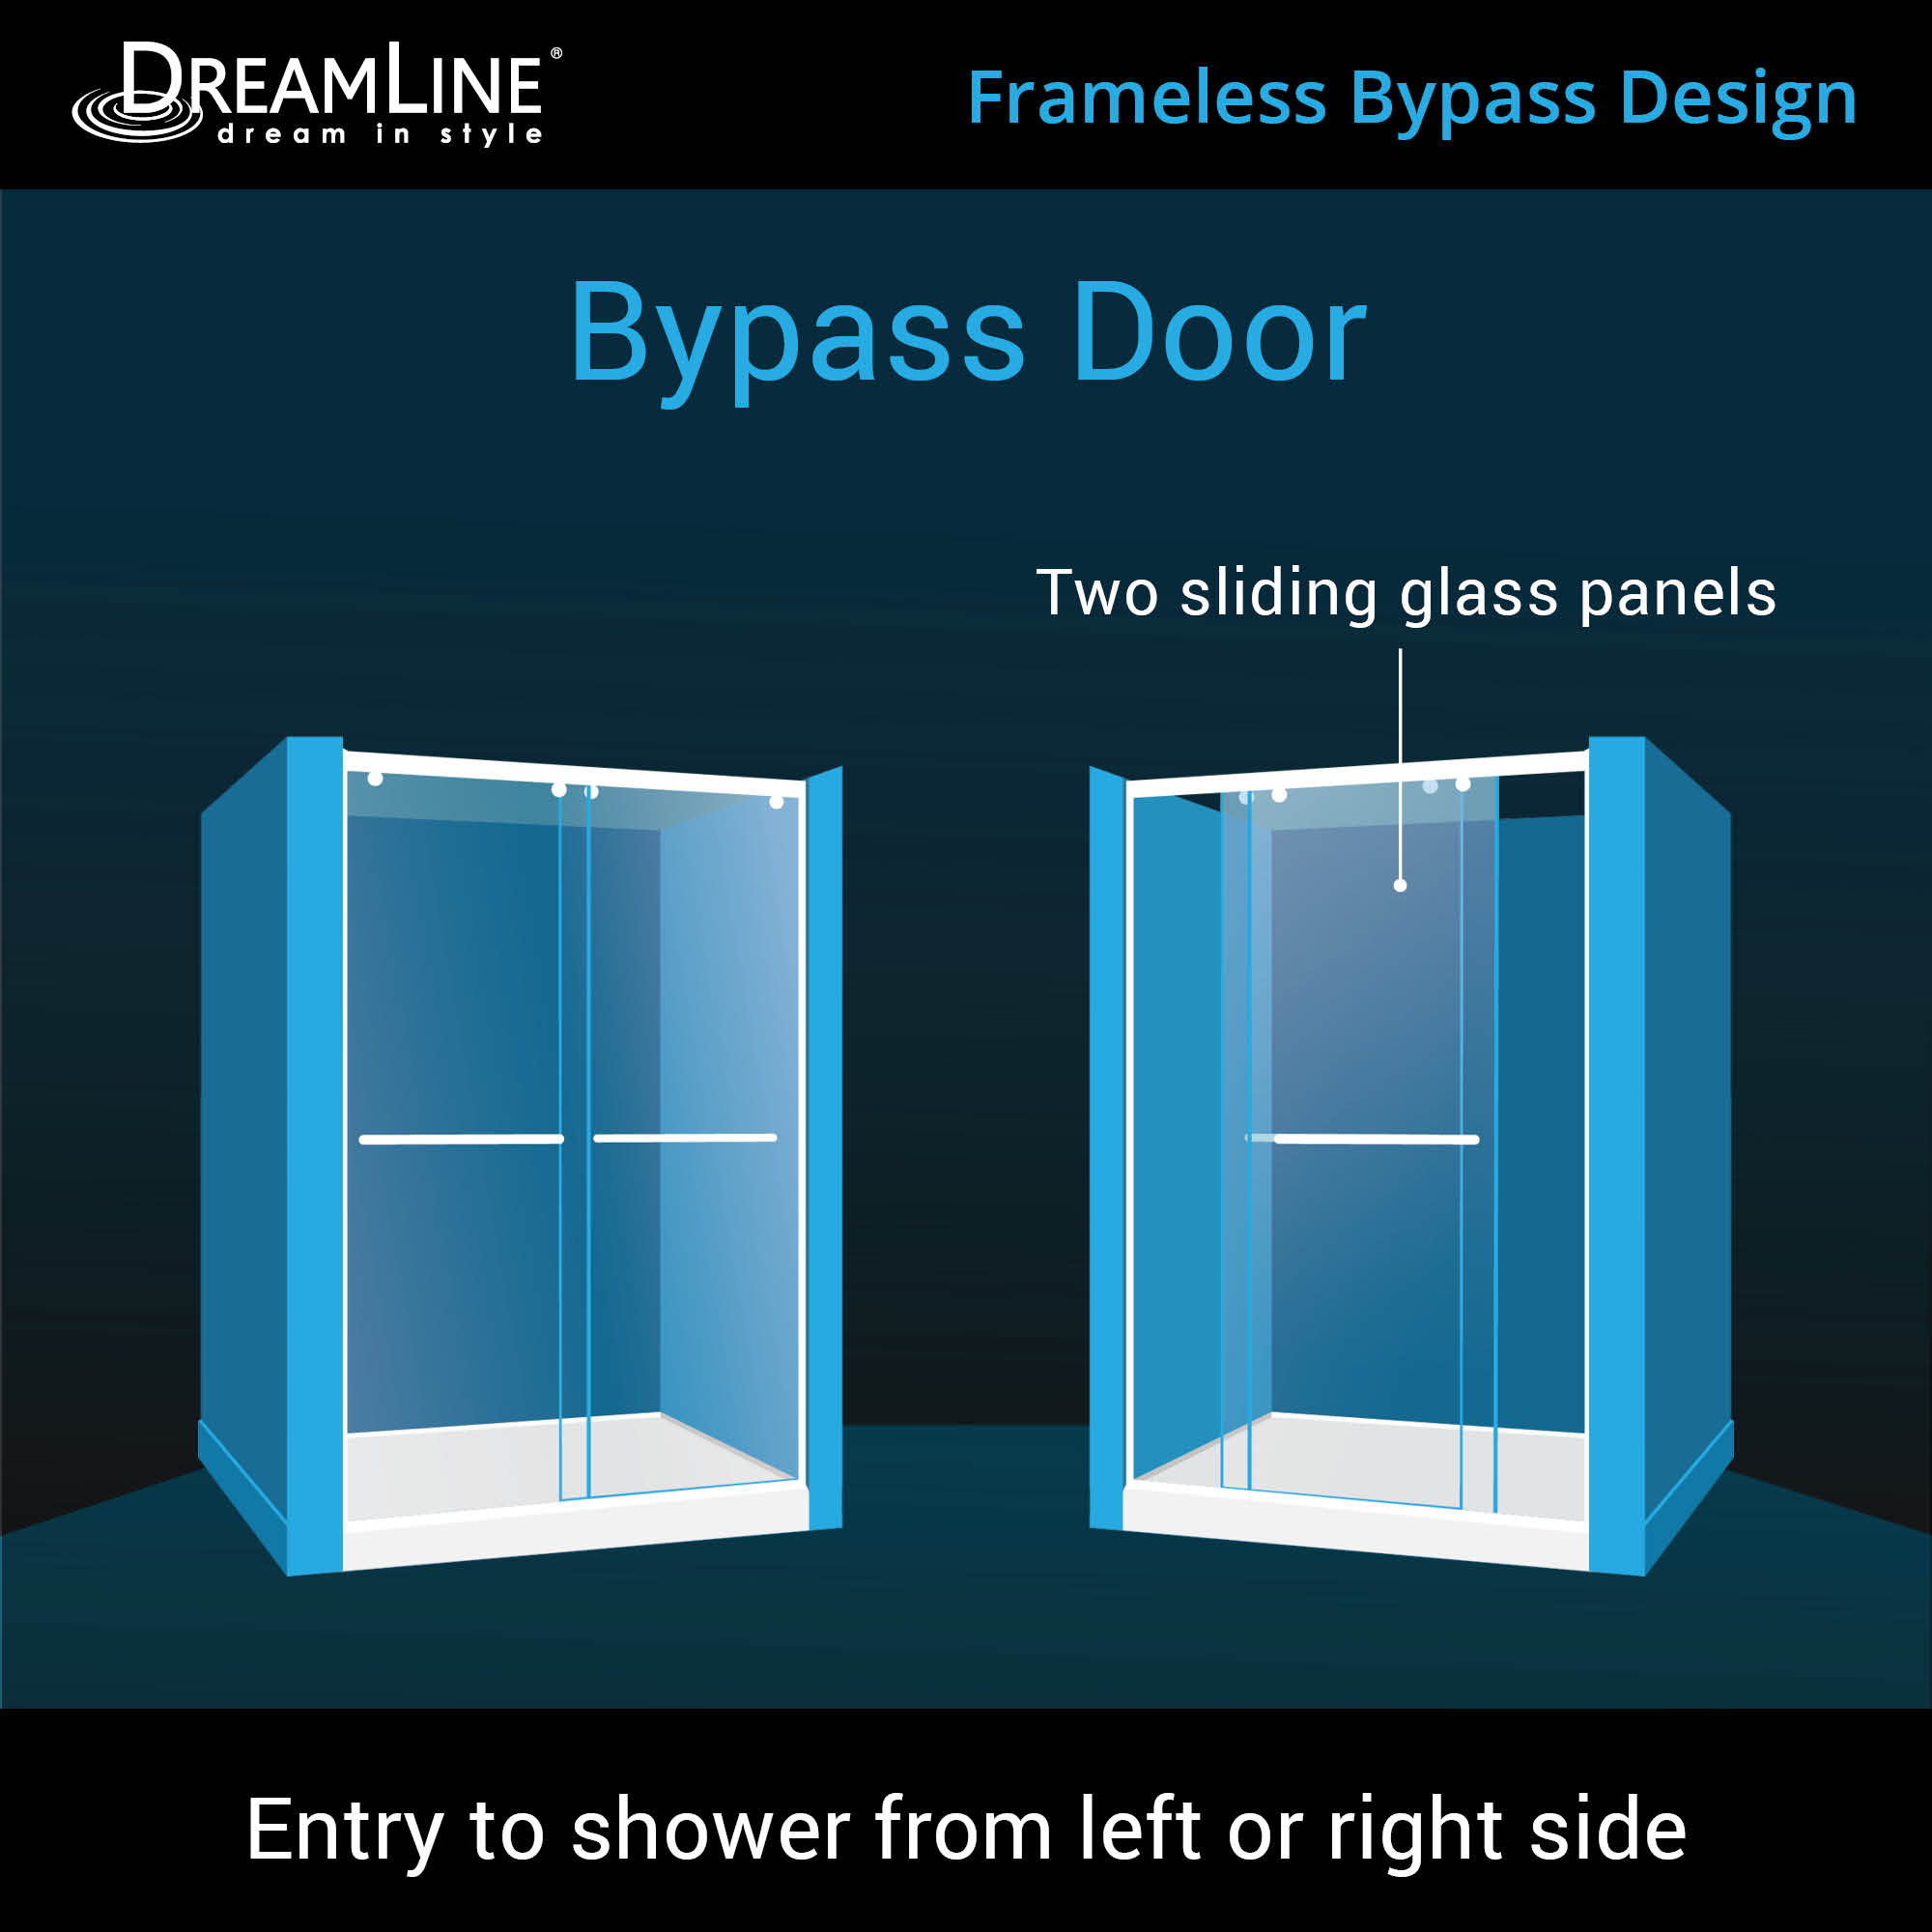 DreamLine Charisma 30 in. D x 60 in. W x 78 3/4 in. H Bypass Shower Door in Chrome with Left Drain Biscuit Base Kit